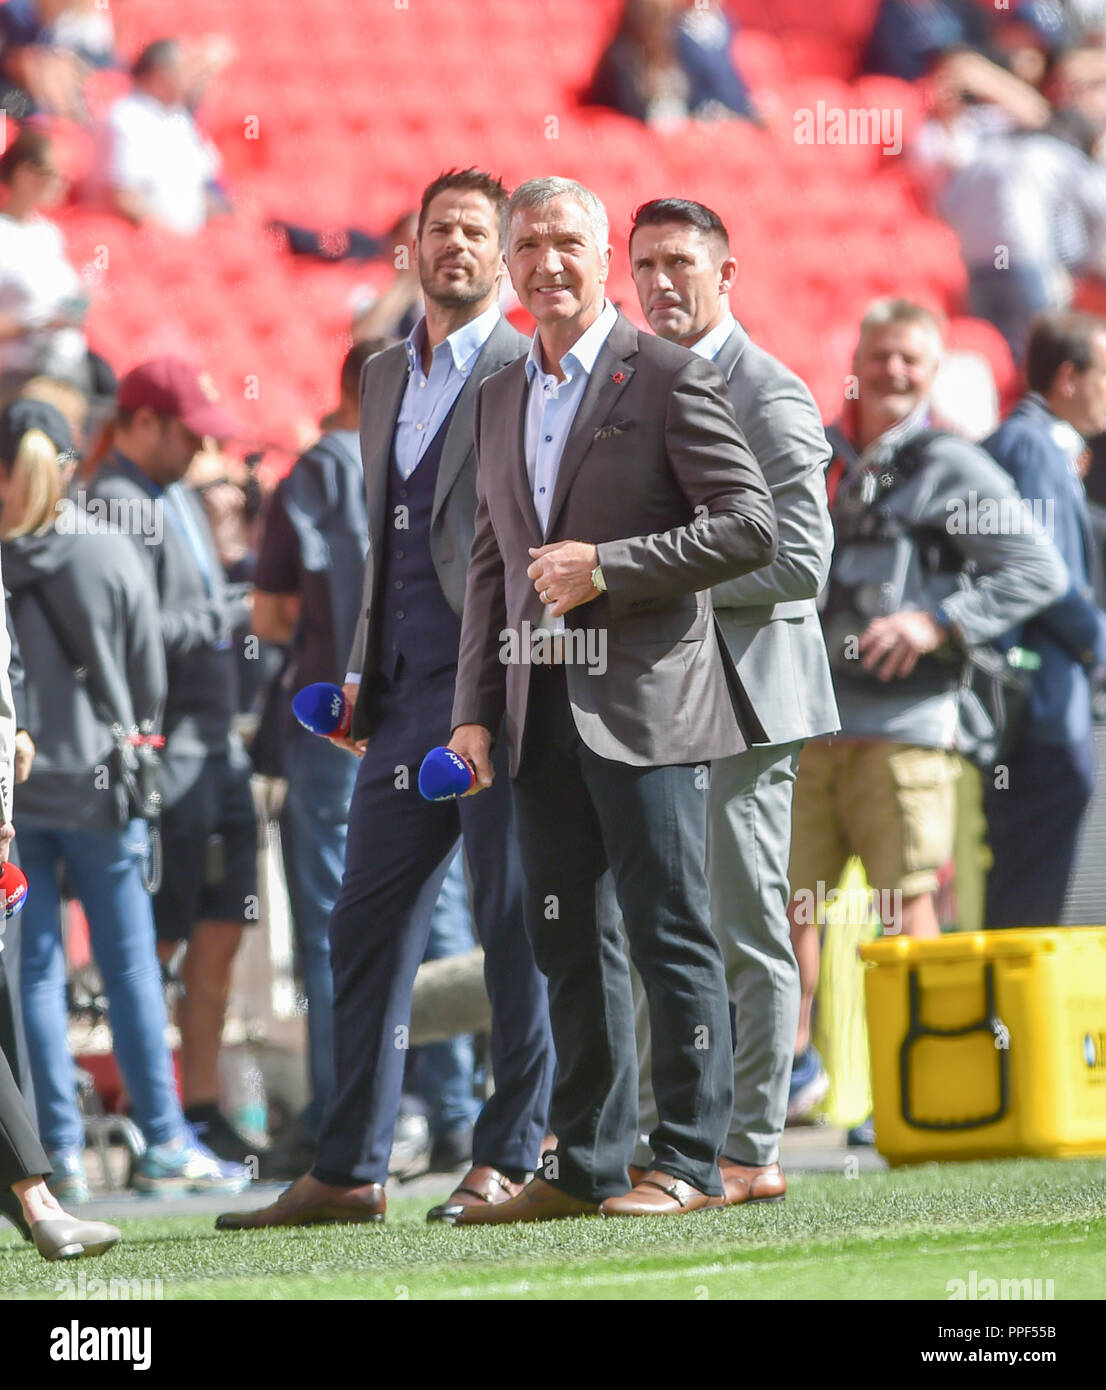 Television pundits and former players Jamie Redknapp , Graeme Souness  and Robbie Keane at the Premier League match between Tottenham Hotspur and Liverpool at Wembley Stadium , London , 15 Sept 2018 Photo Simon Dack / Telephoto Images.  Editorial use only. No merchandising. For Football images FA and Premier League restrictions apply inc. no internet/mobile usage without FAPL license - for details contact Football Dataco Stock Photo